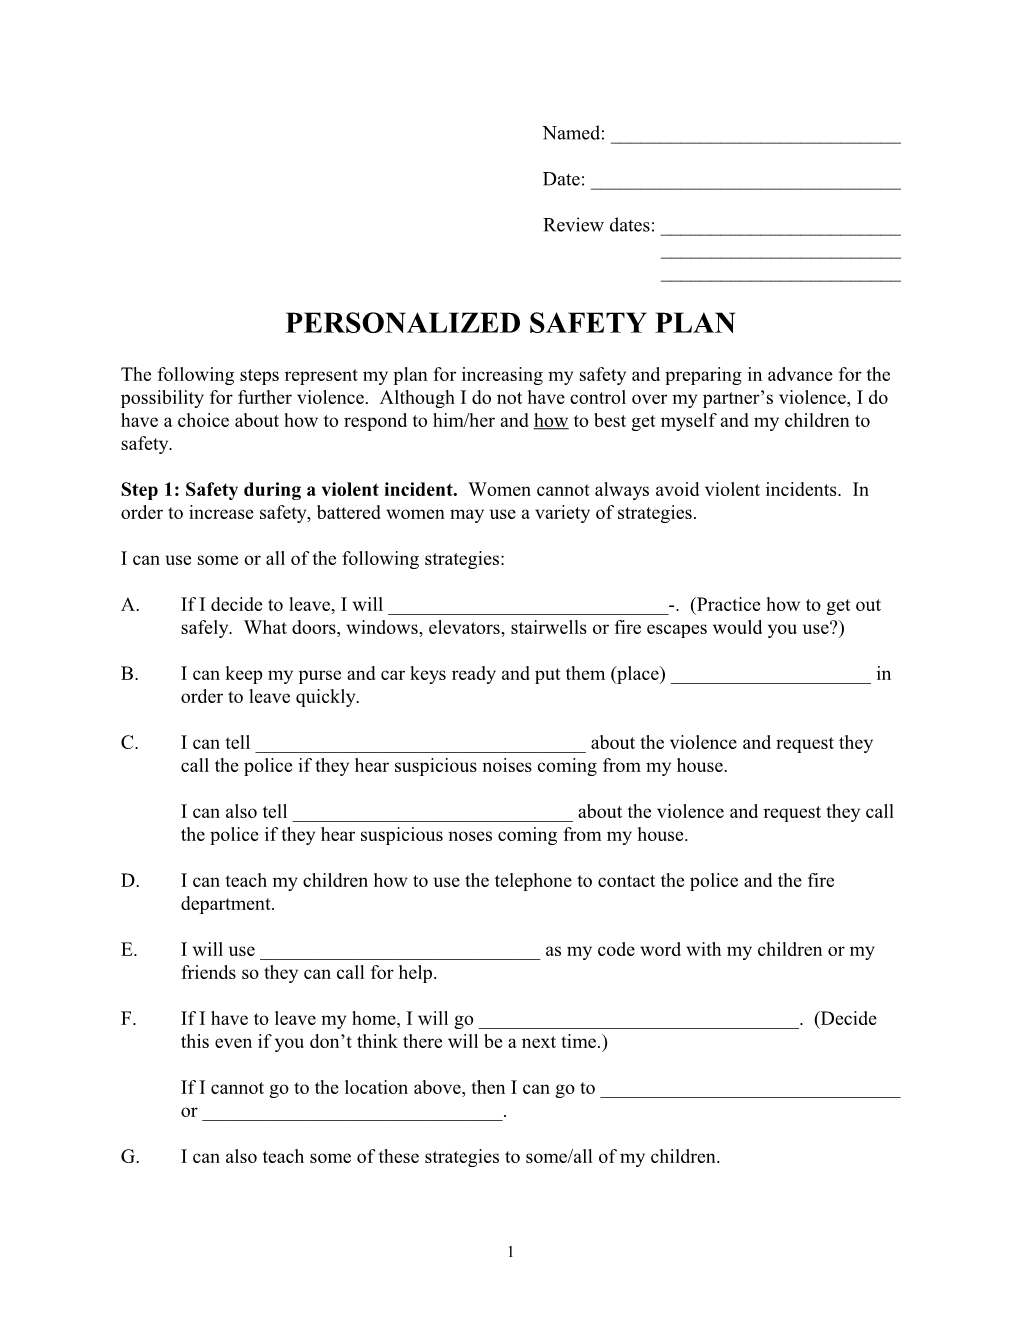 Personalized Safety Plan